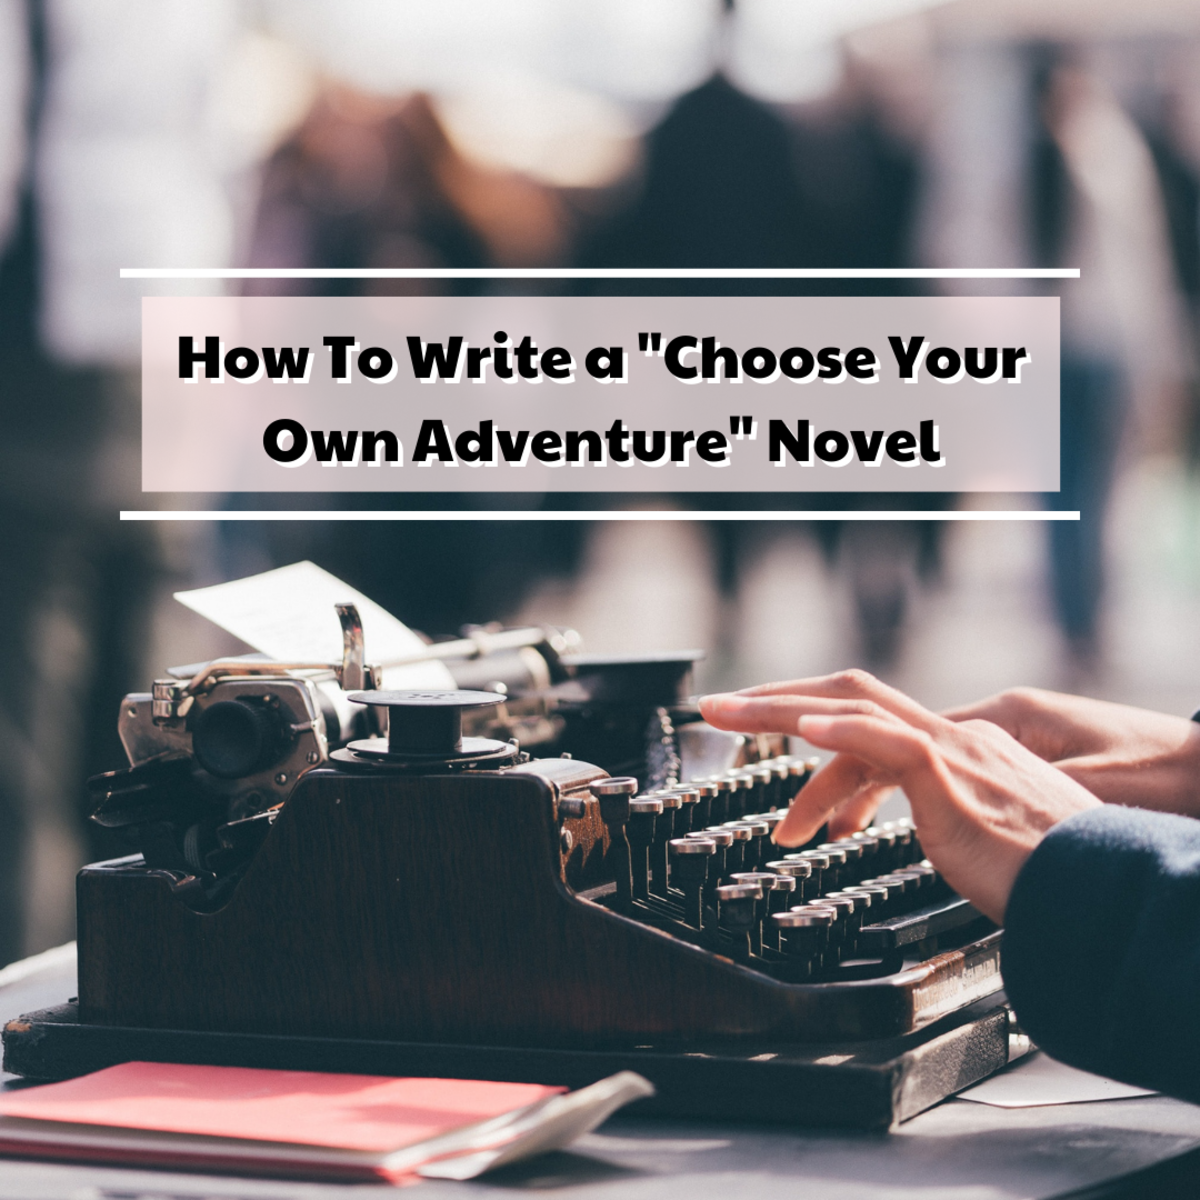 Read on for six easy-to-follow steps to help you write your “choose your own adventure” novel.